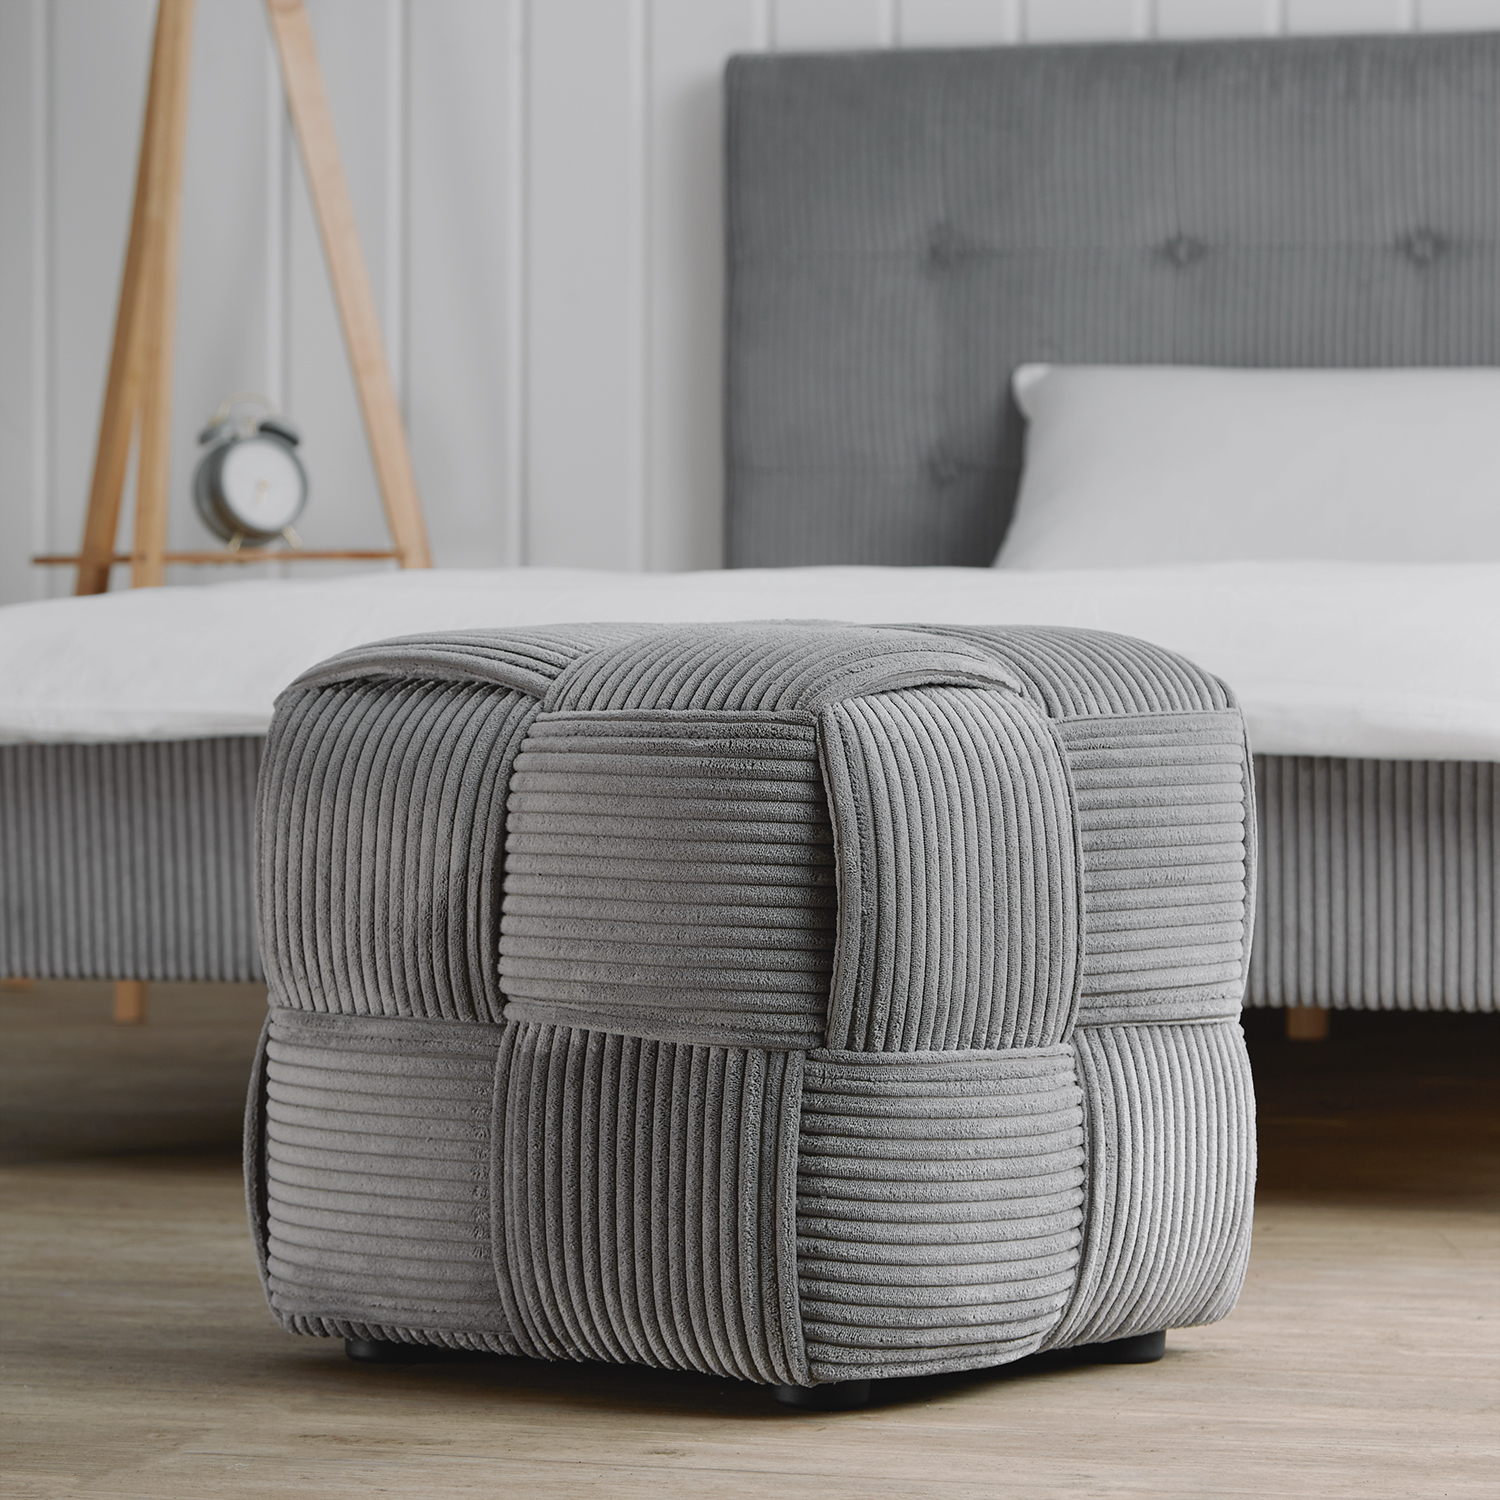 Footstool Pouffe Grey Cord Stool Small Footrest Upholstered Seater Cube Seat